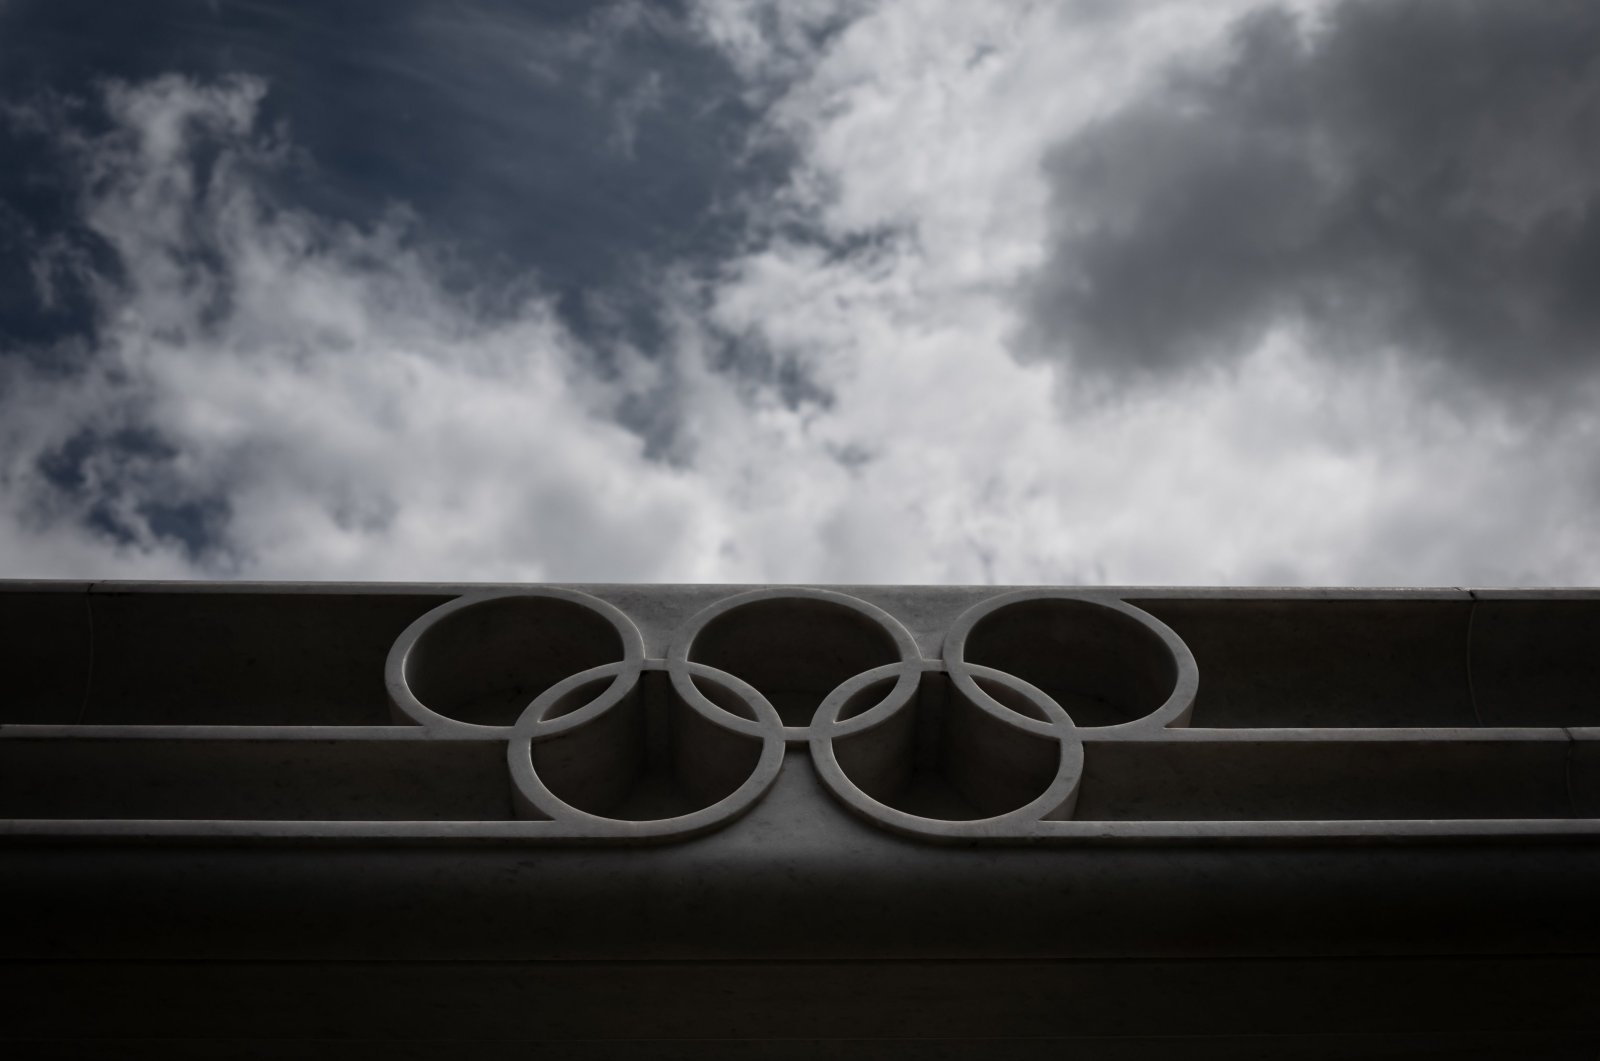 The Olympic rings logo at the entrance of the headquarters of the International Olympic Committee (IOC) in Lausanne, Switzerland, June 8, 2020. (AFP Photo)